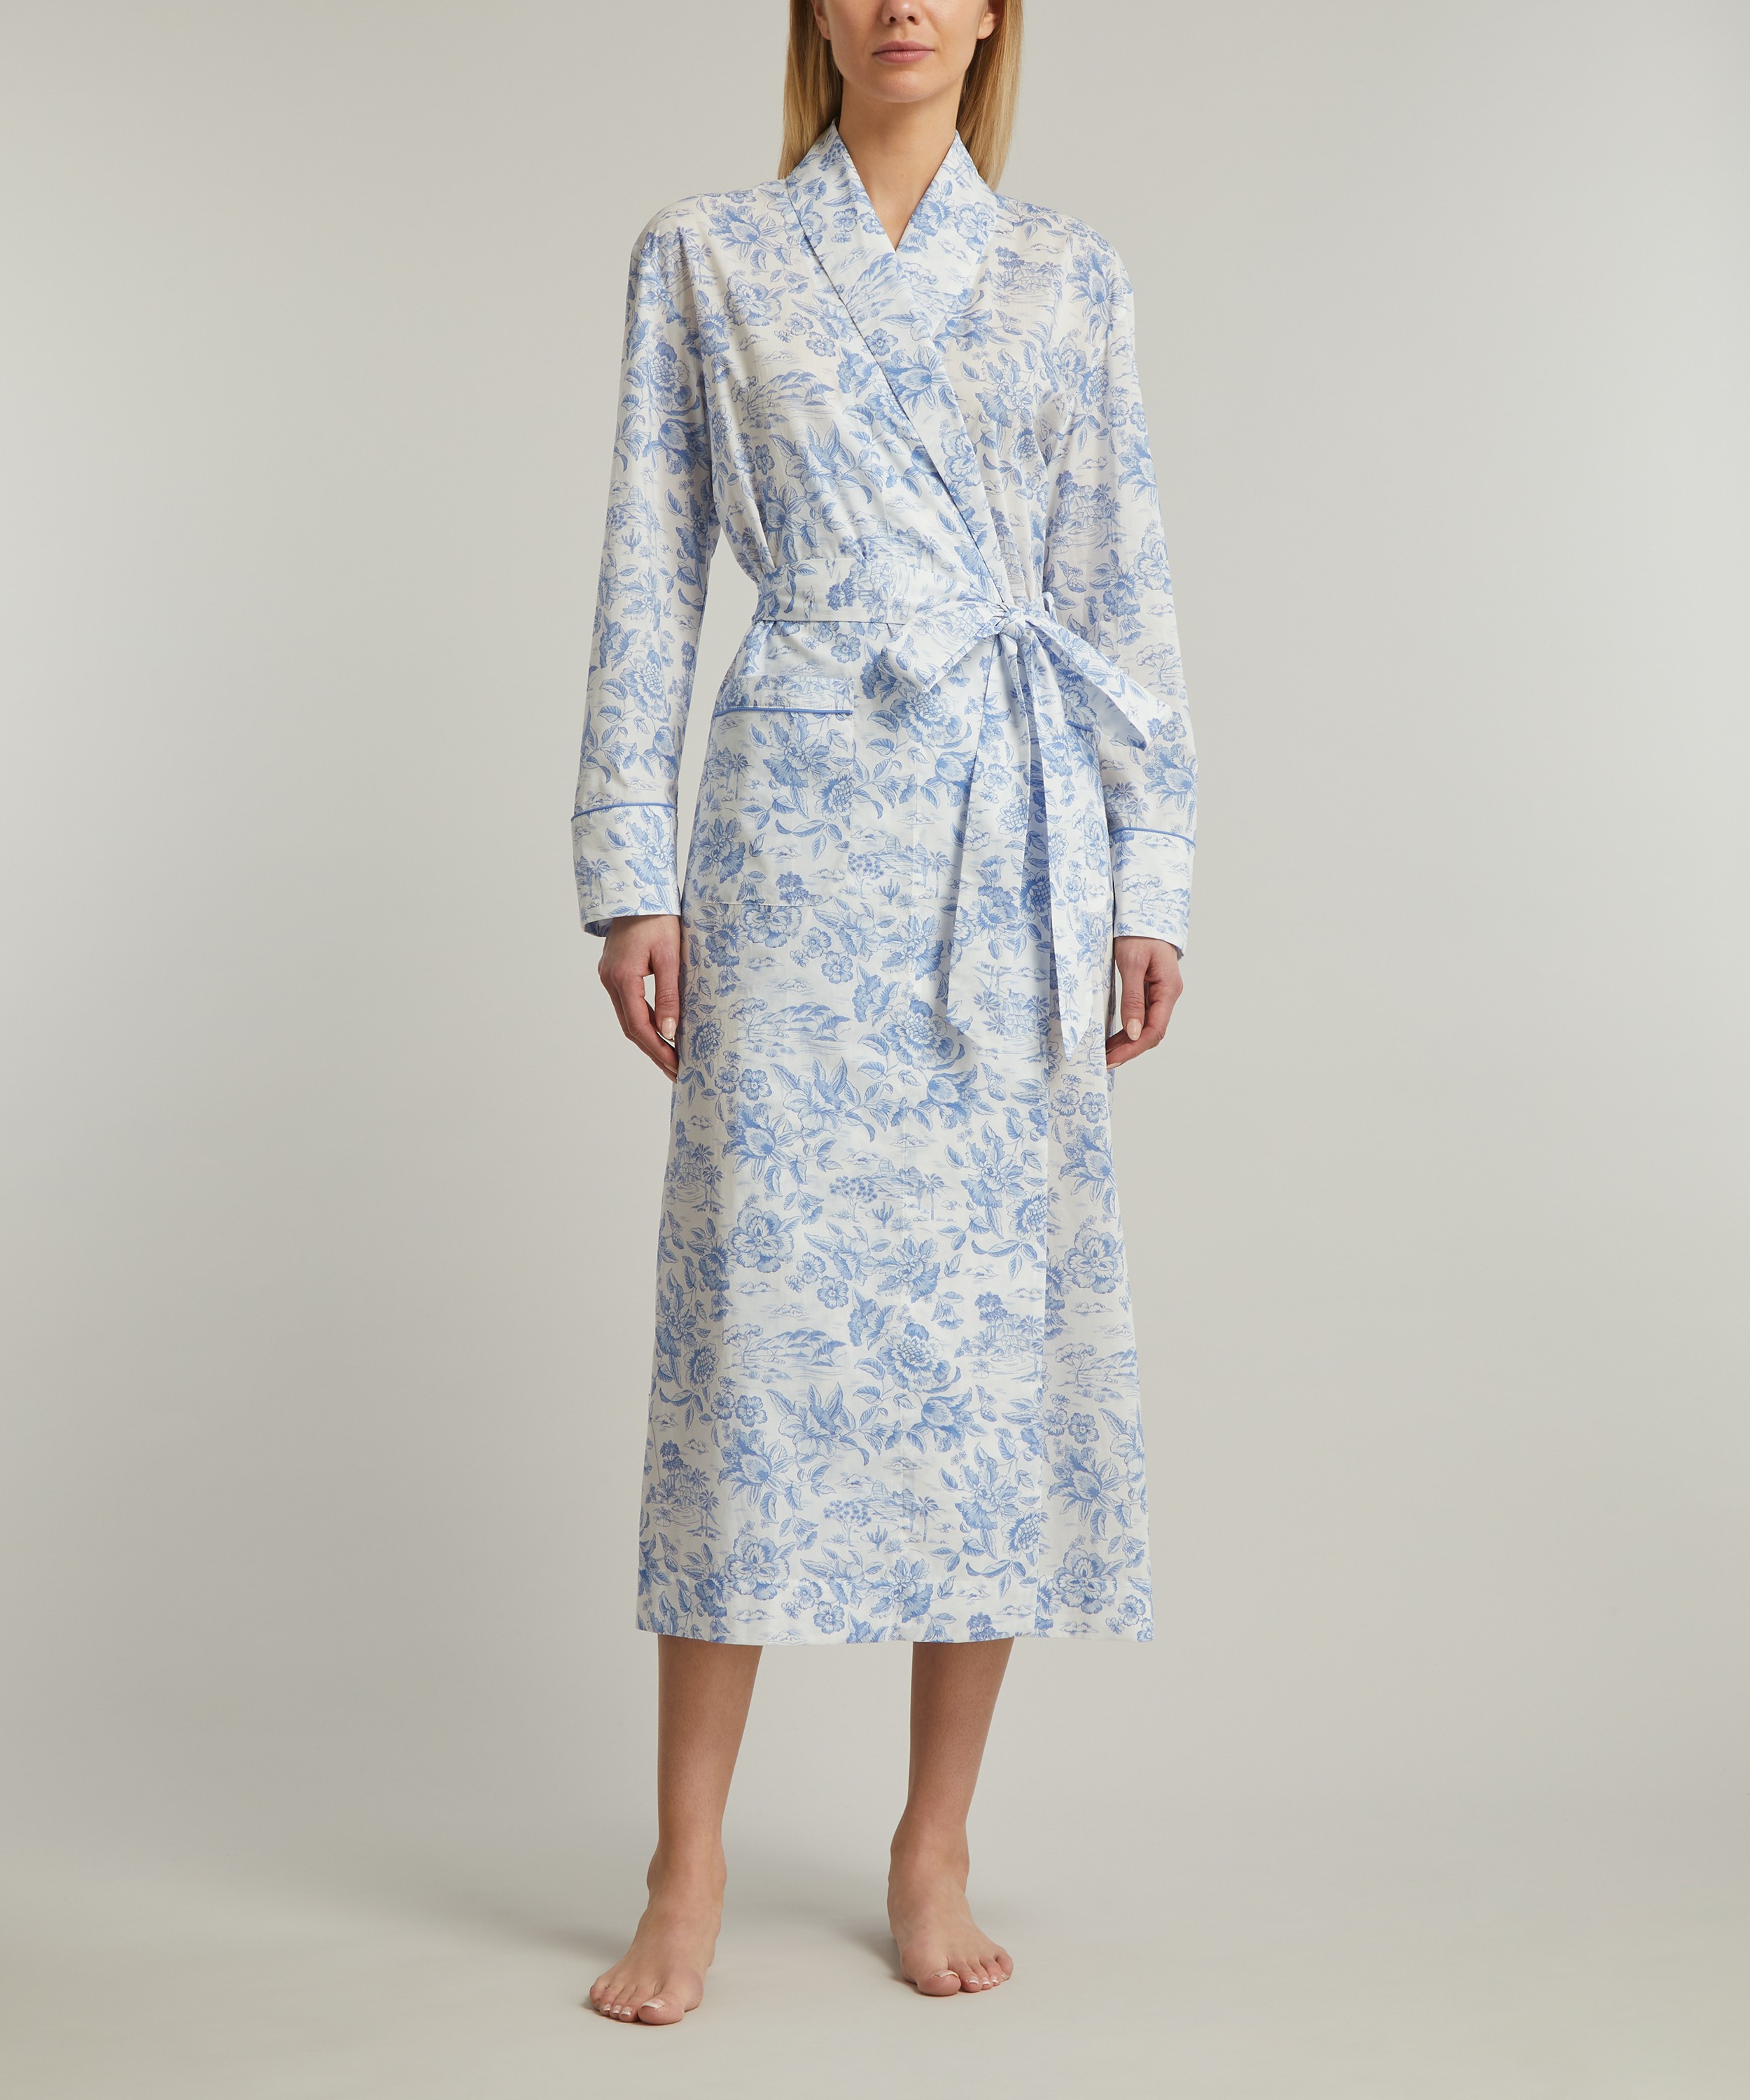 Liberty - Delft Lagoon Tana Lawn™ Cotton Classic Robe image number 1